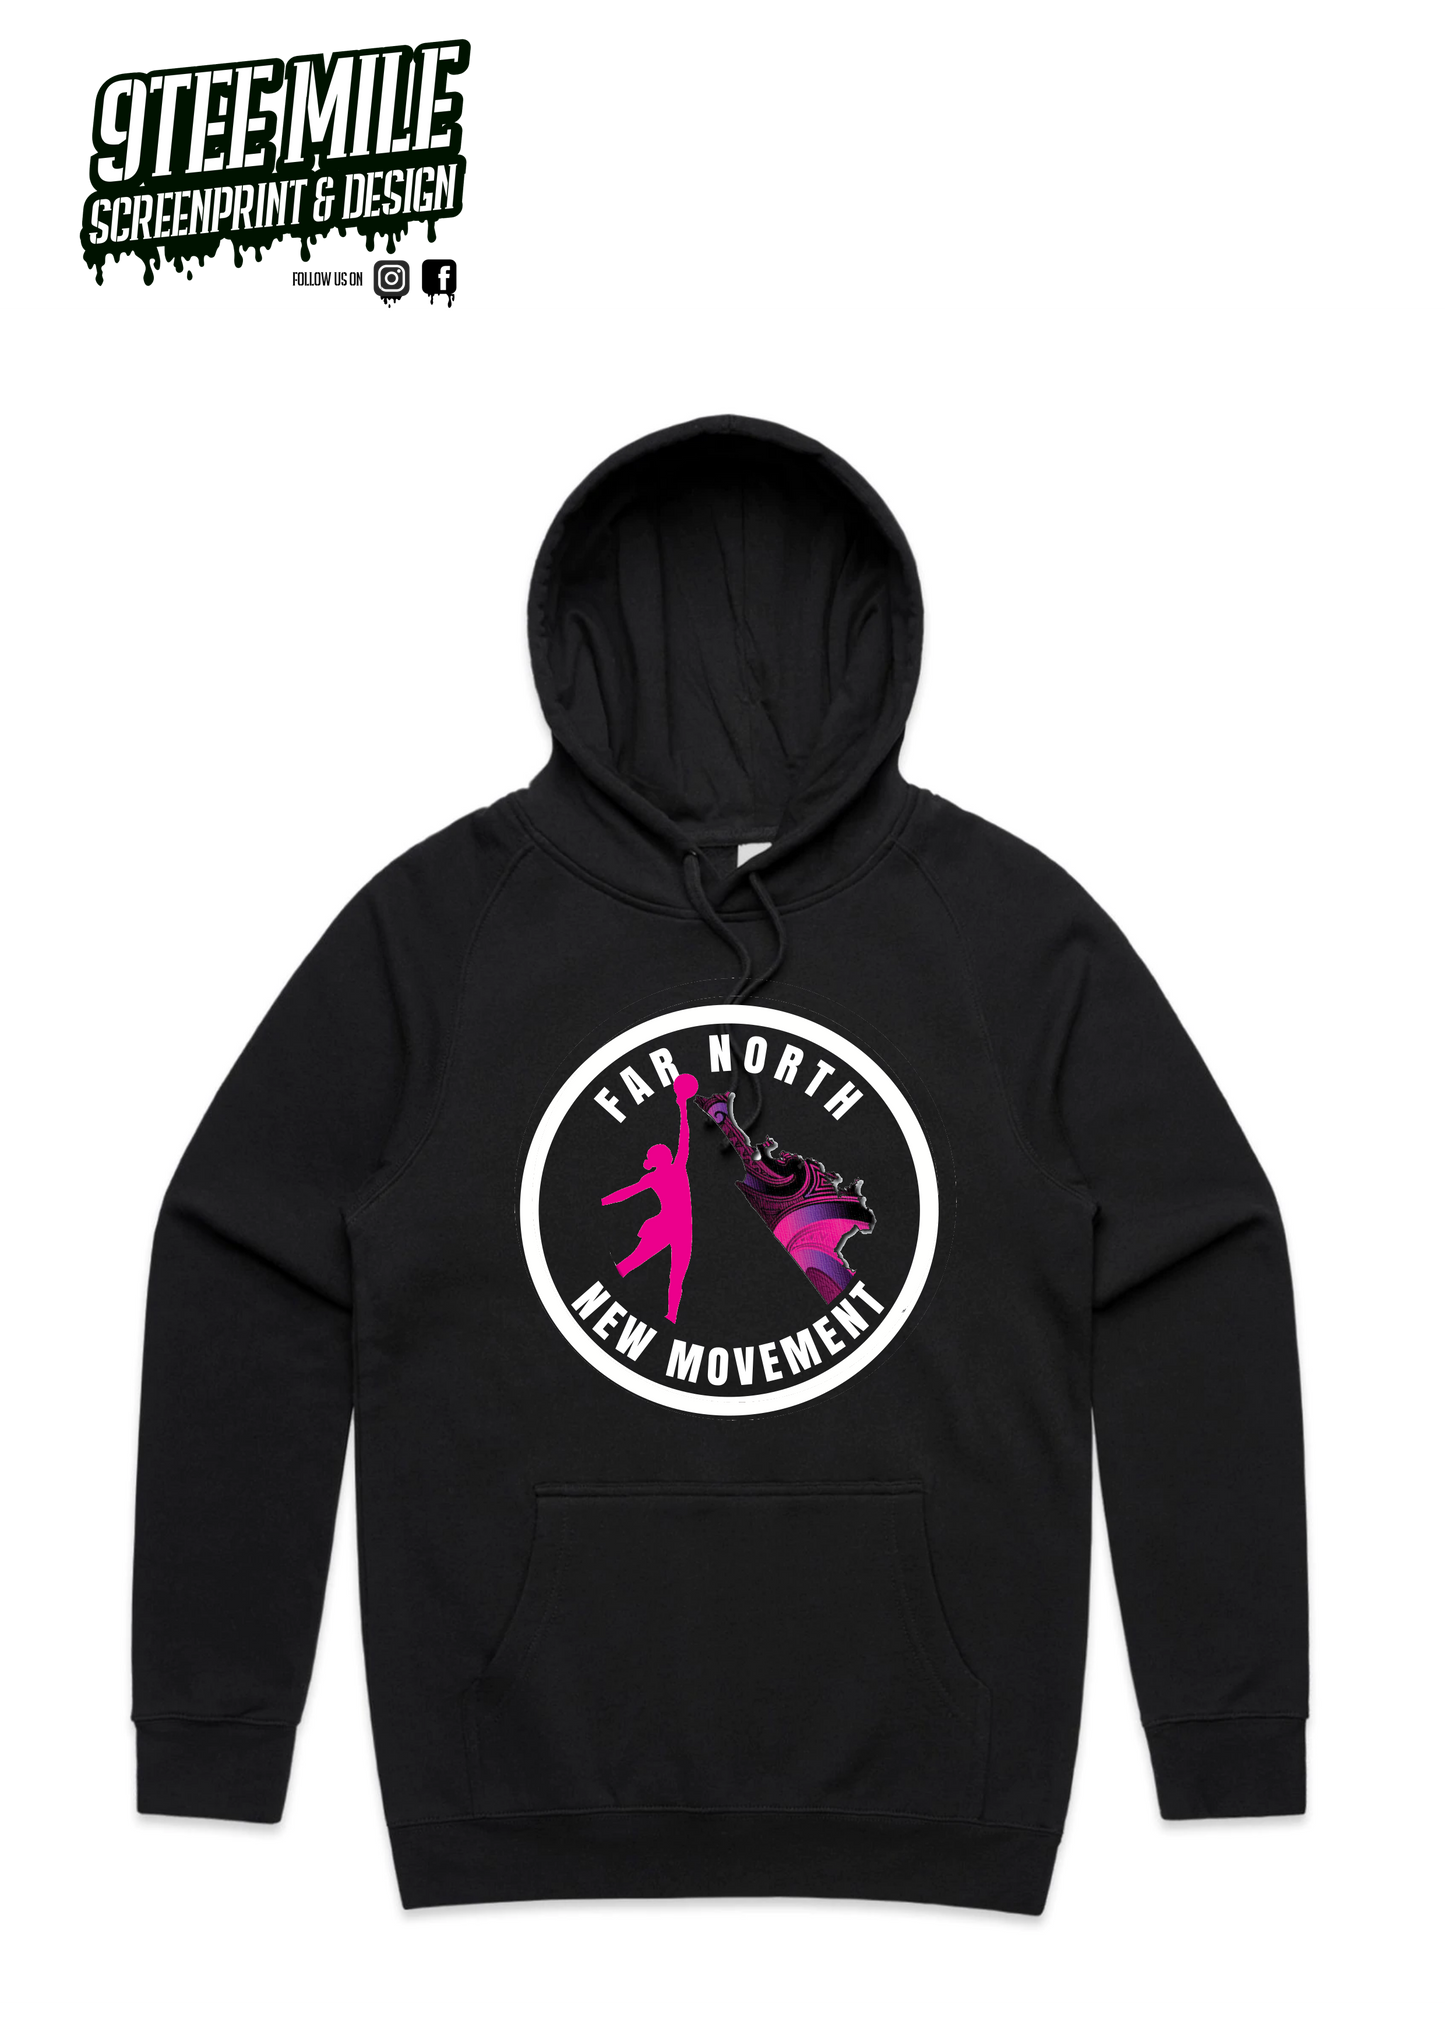 Far North New Movement Hoodies - Adult - NAMED